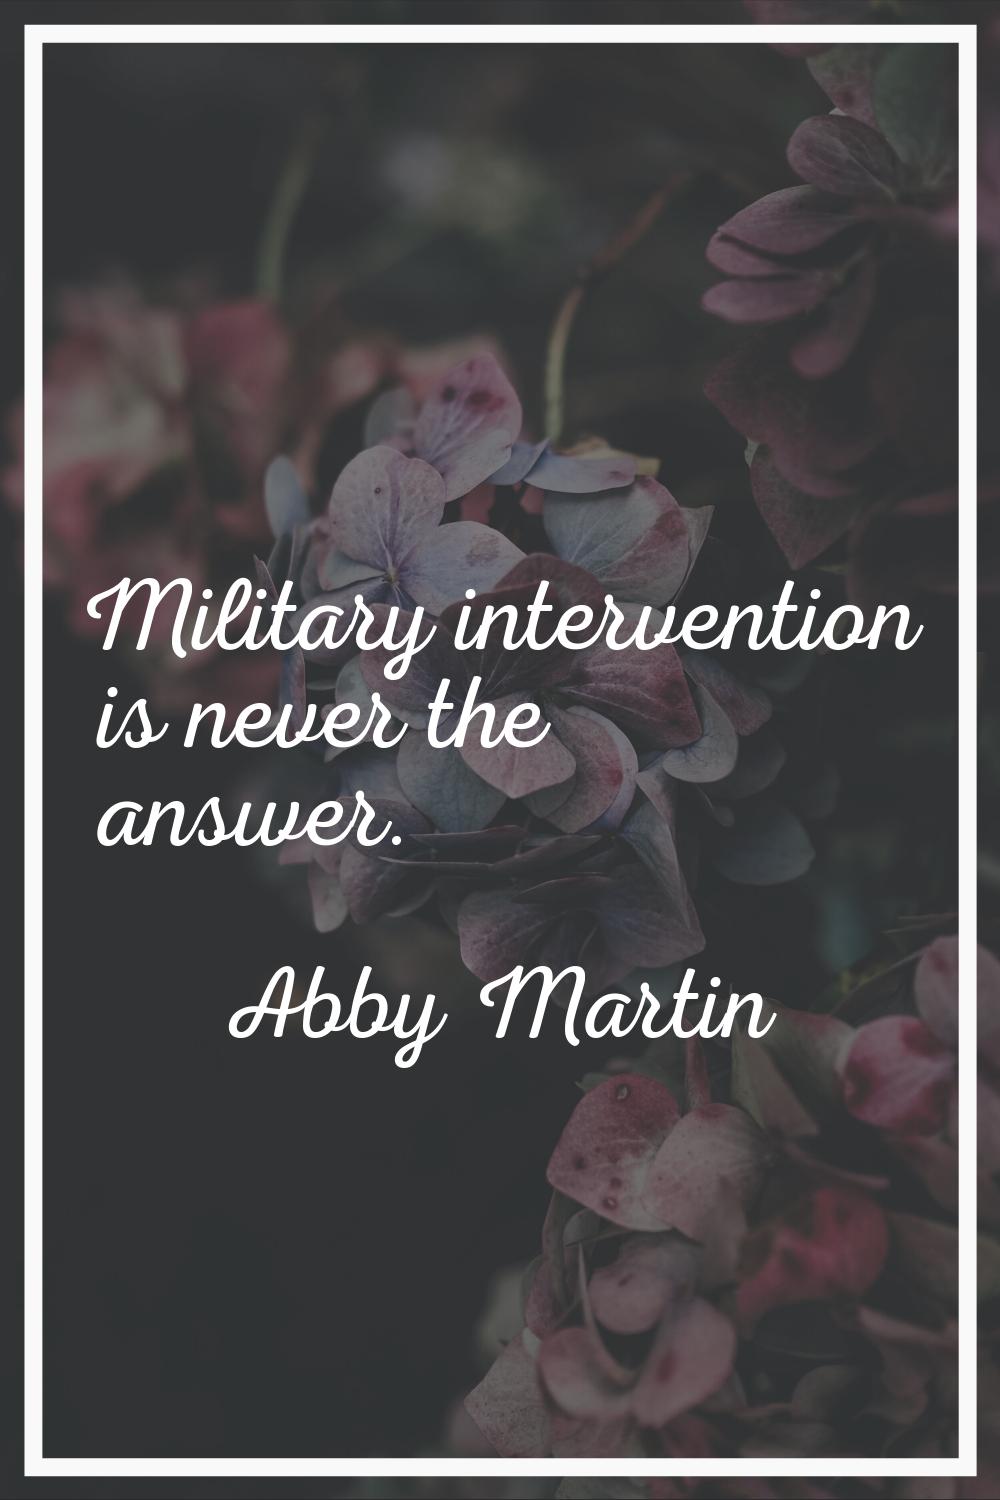 Military intervention is never the answer.